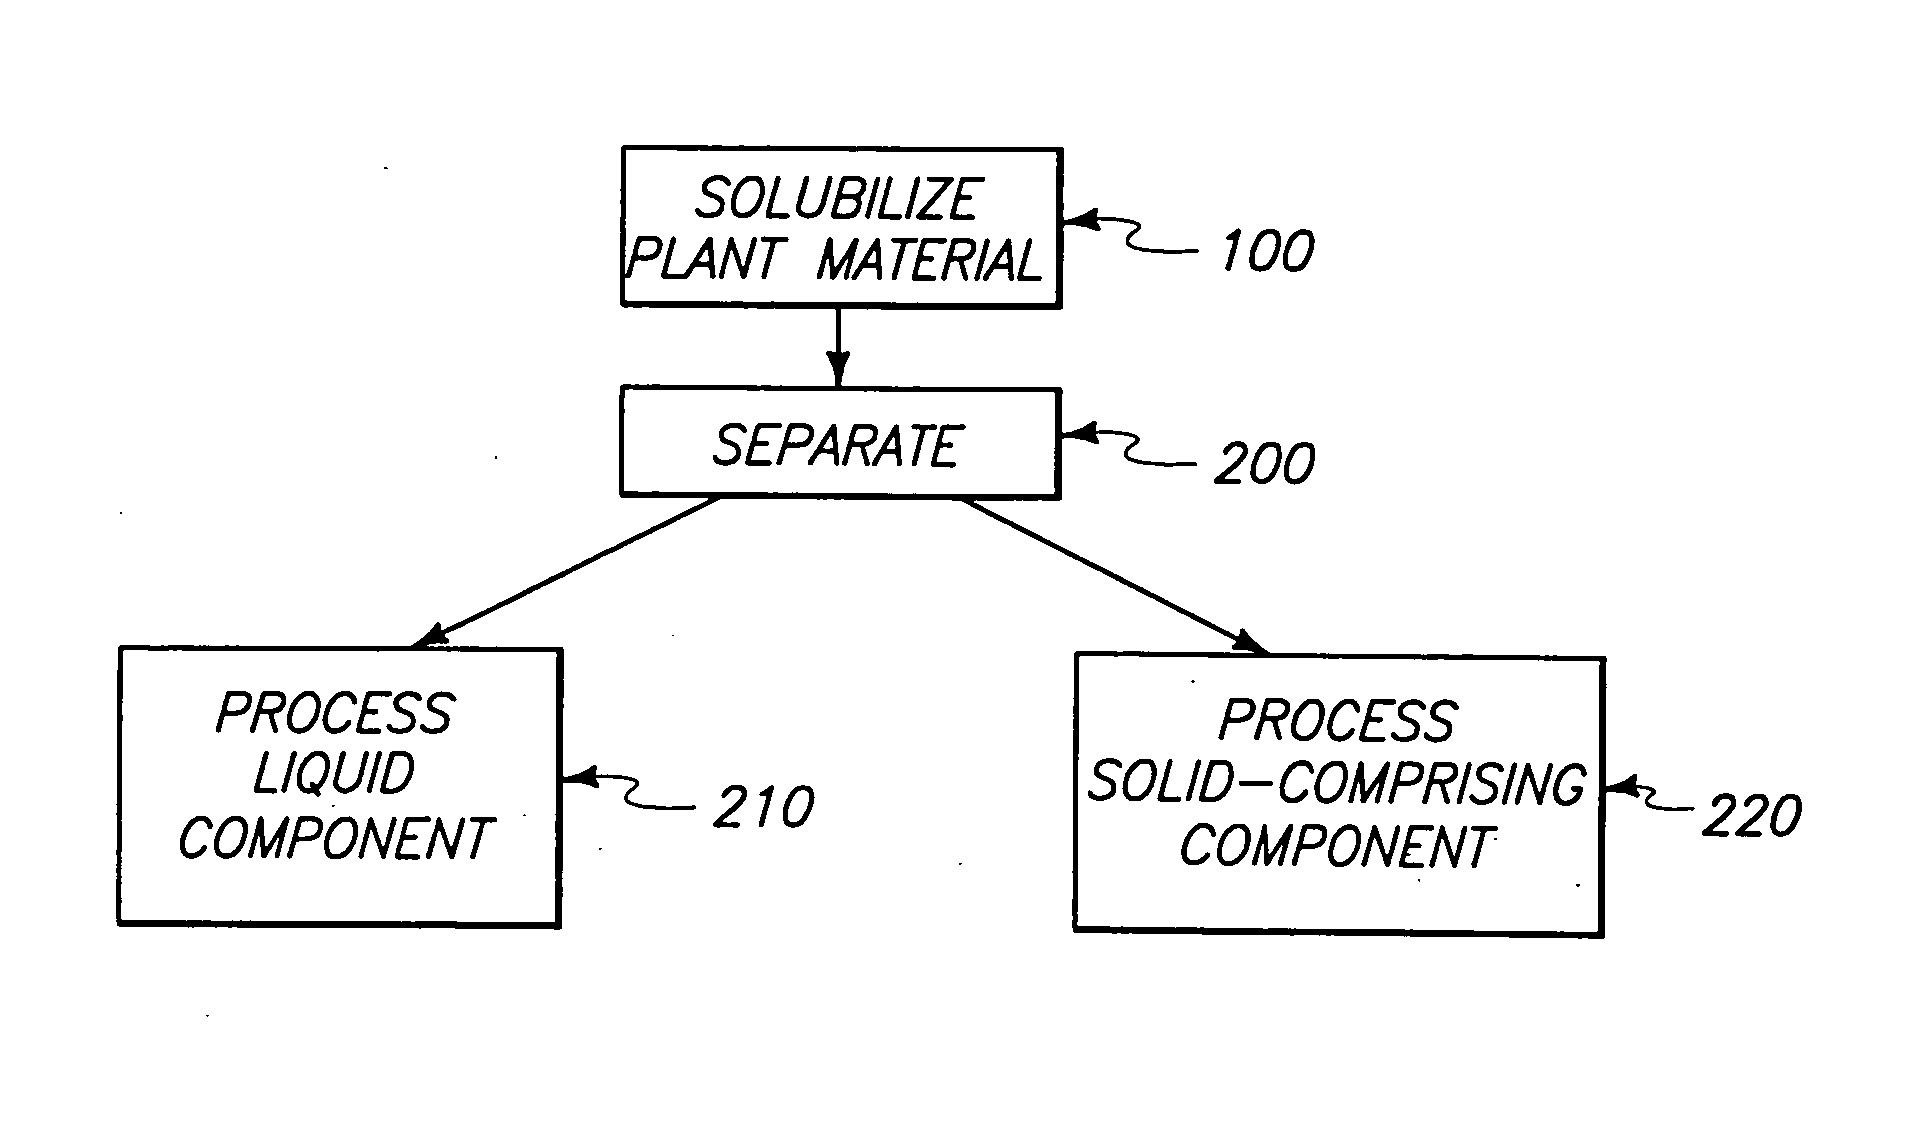 Methods of producing compounds from plant materials